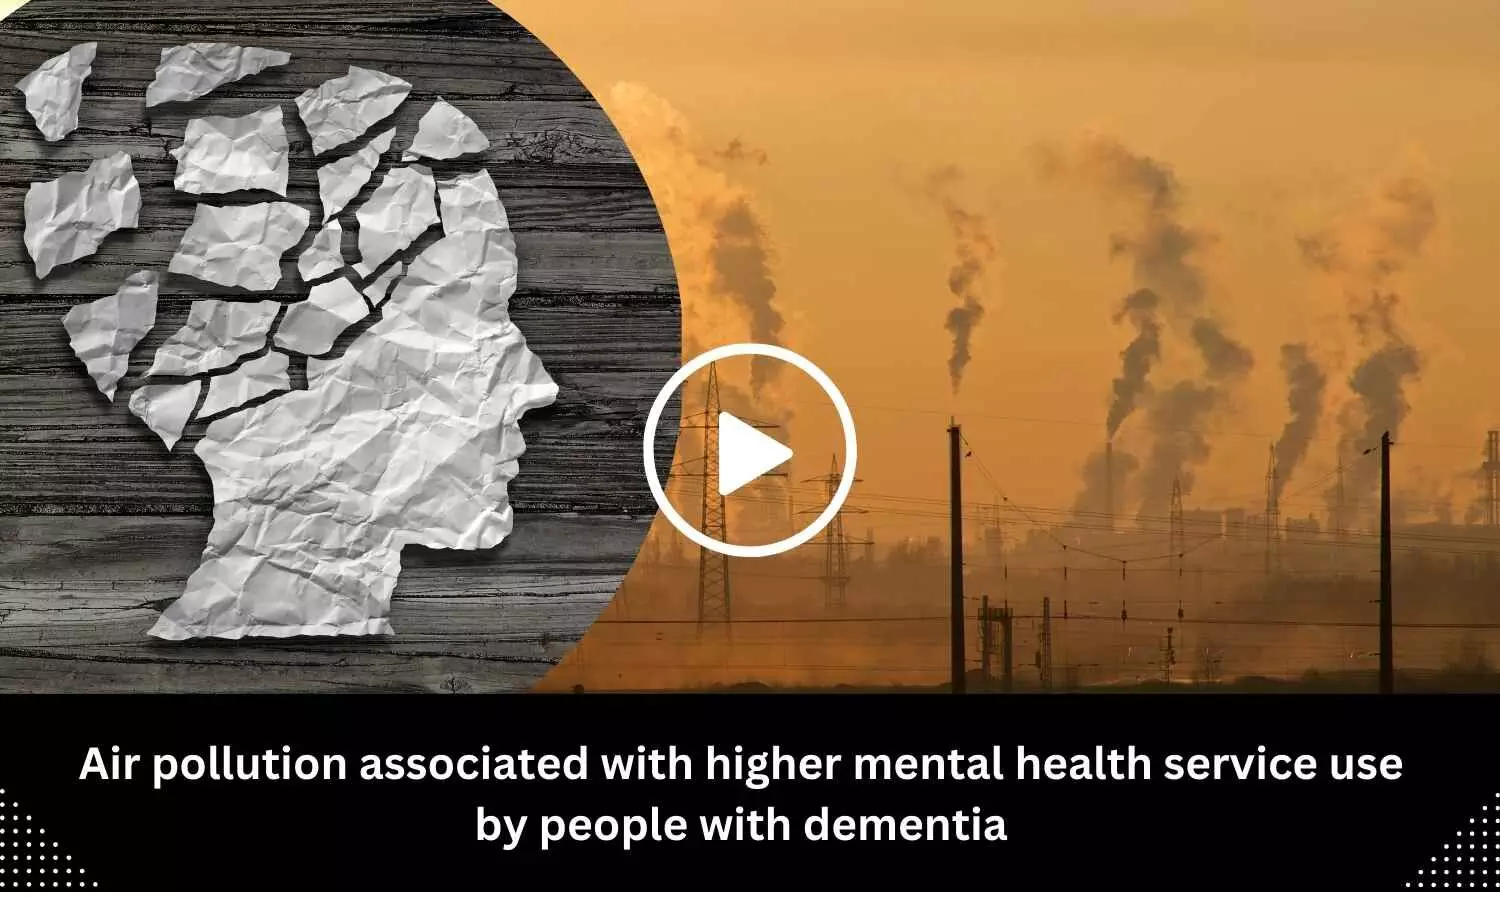 Air pollution associated with higher mental health service use by people with dementia